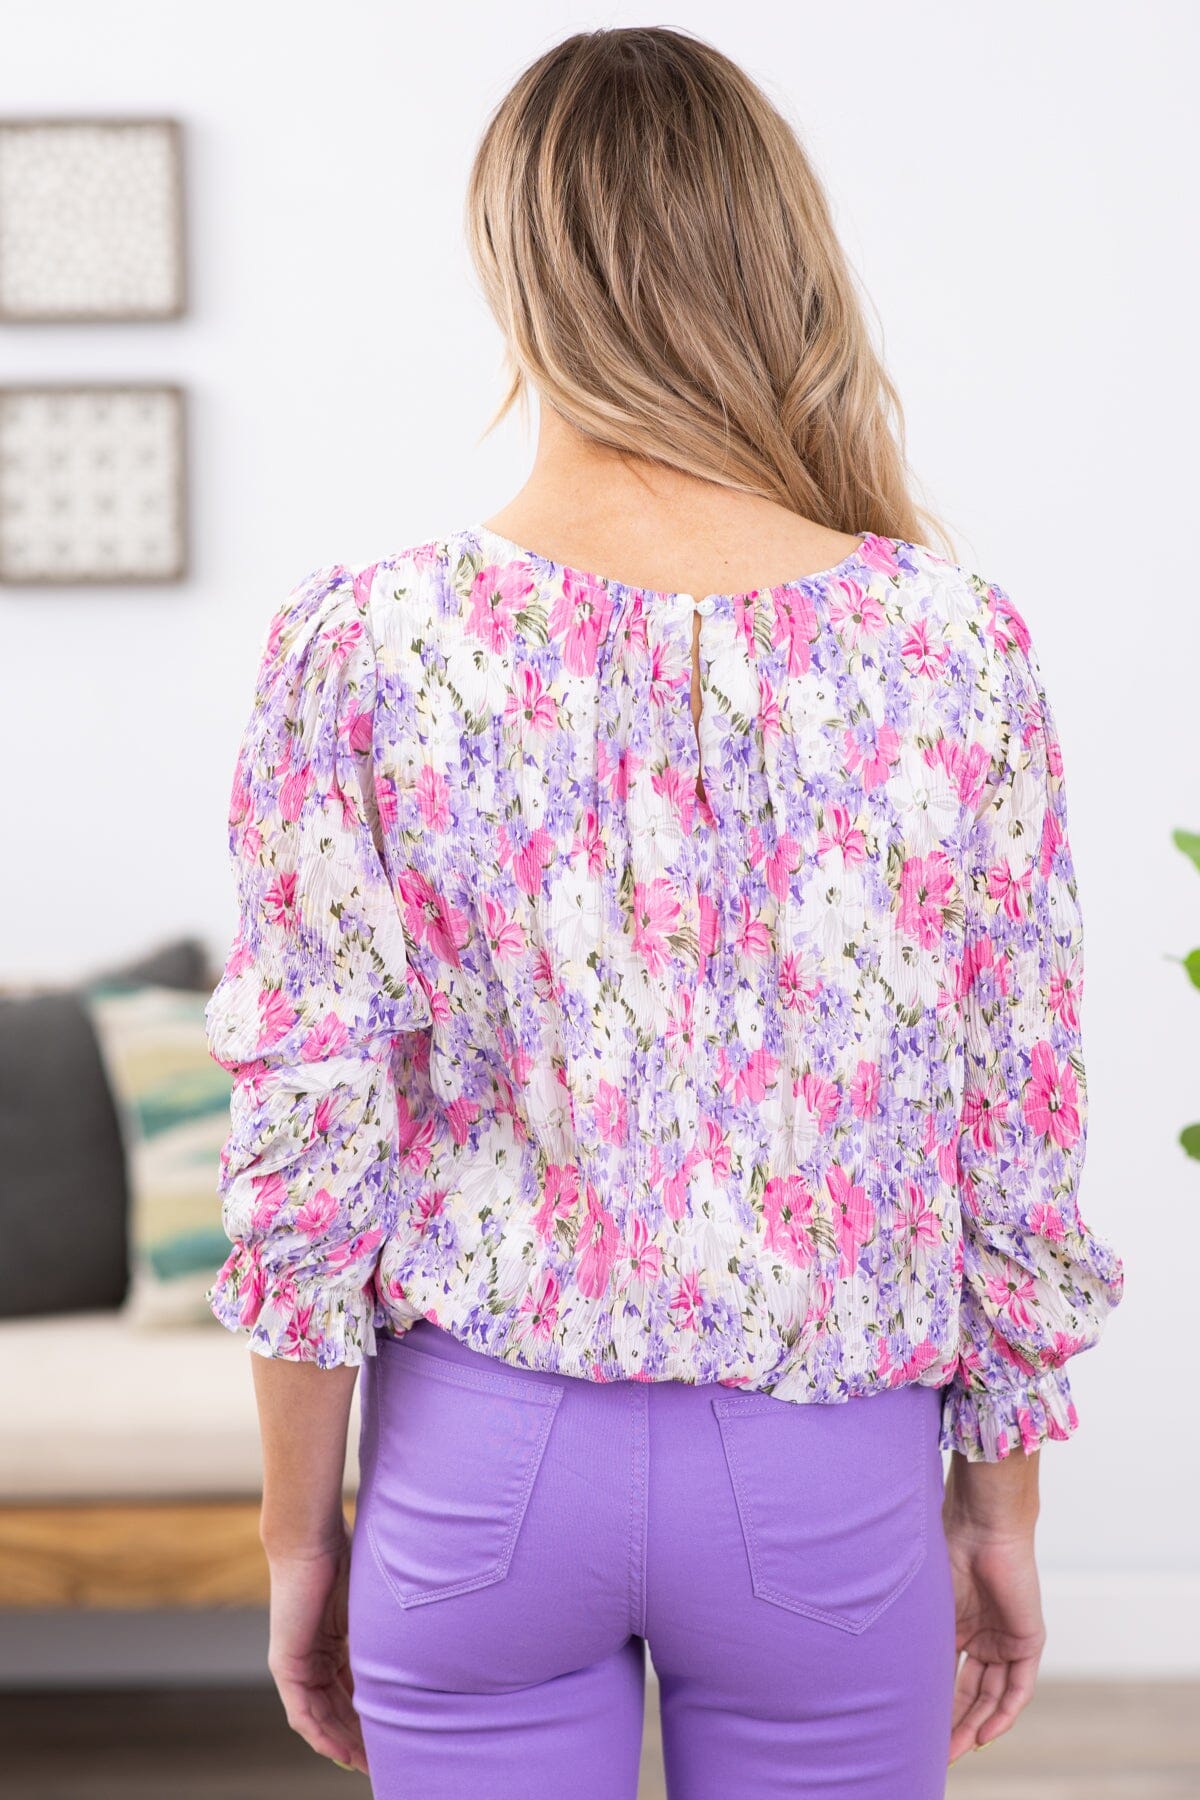 Hot Pink and Lavender Pleated Floral Print Top - Filly Flair